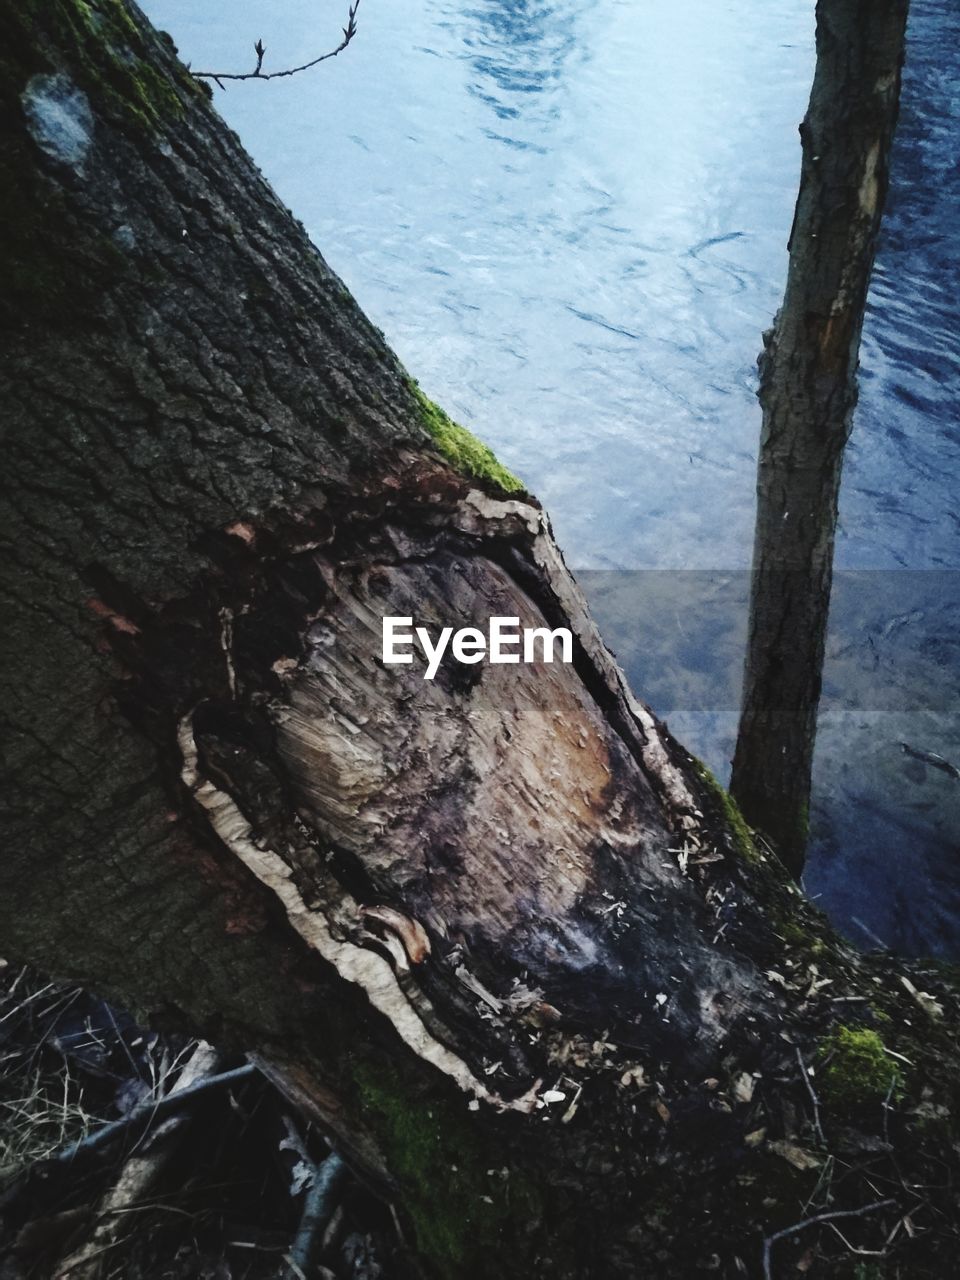 CLOSE-UP OF TREE BY WATER